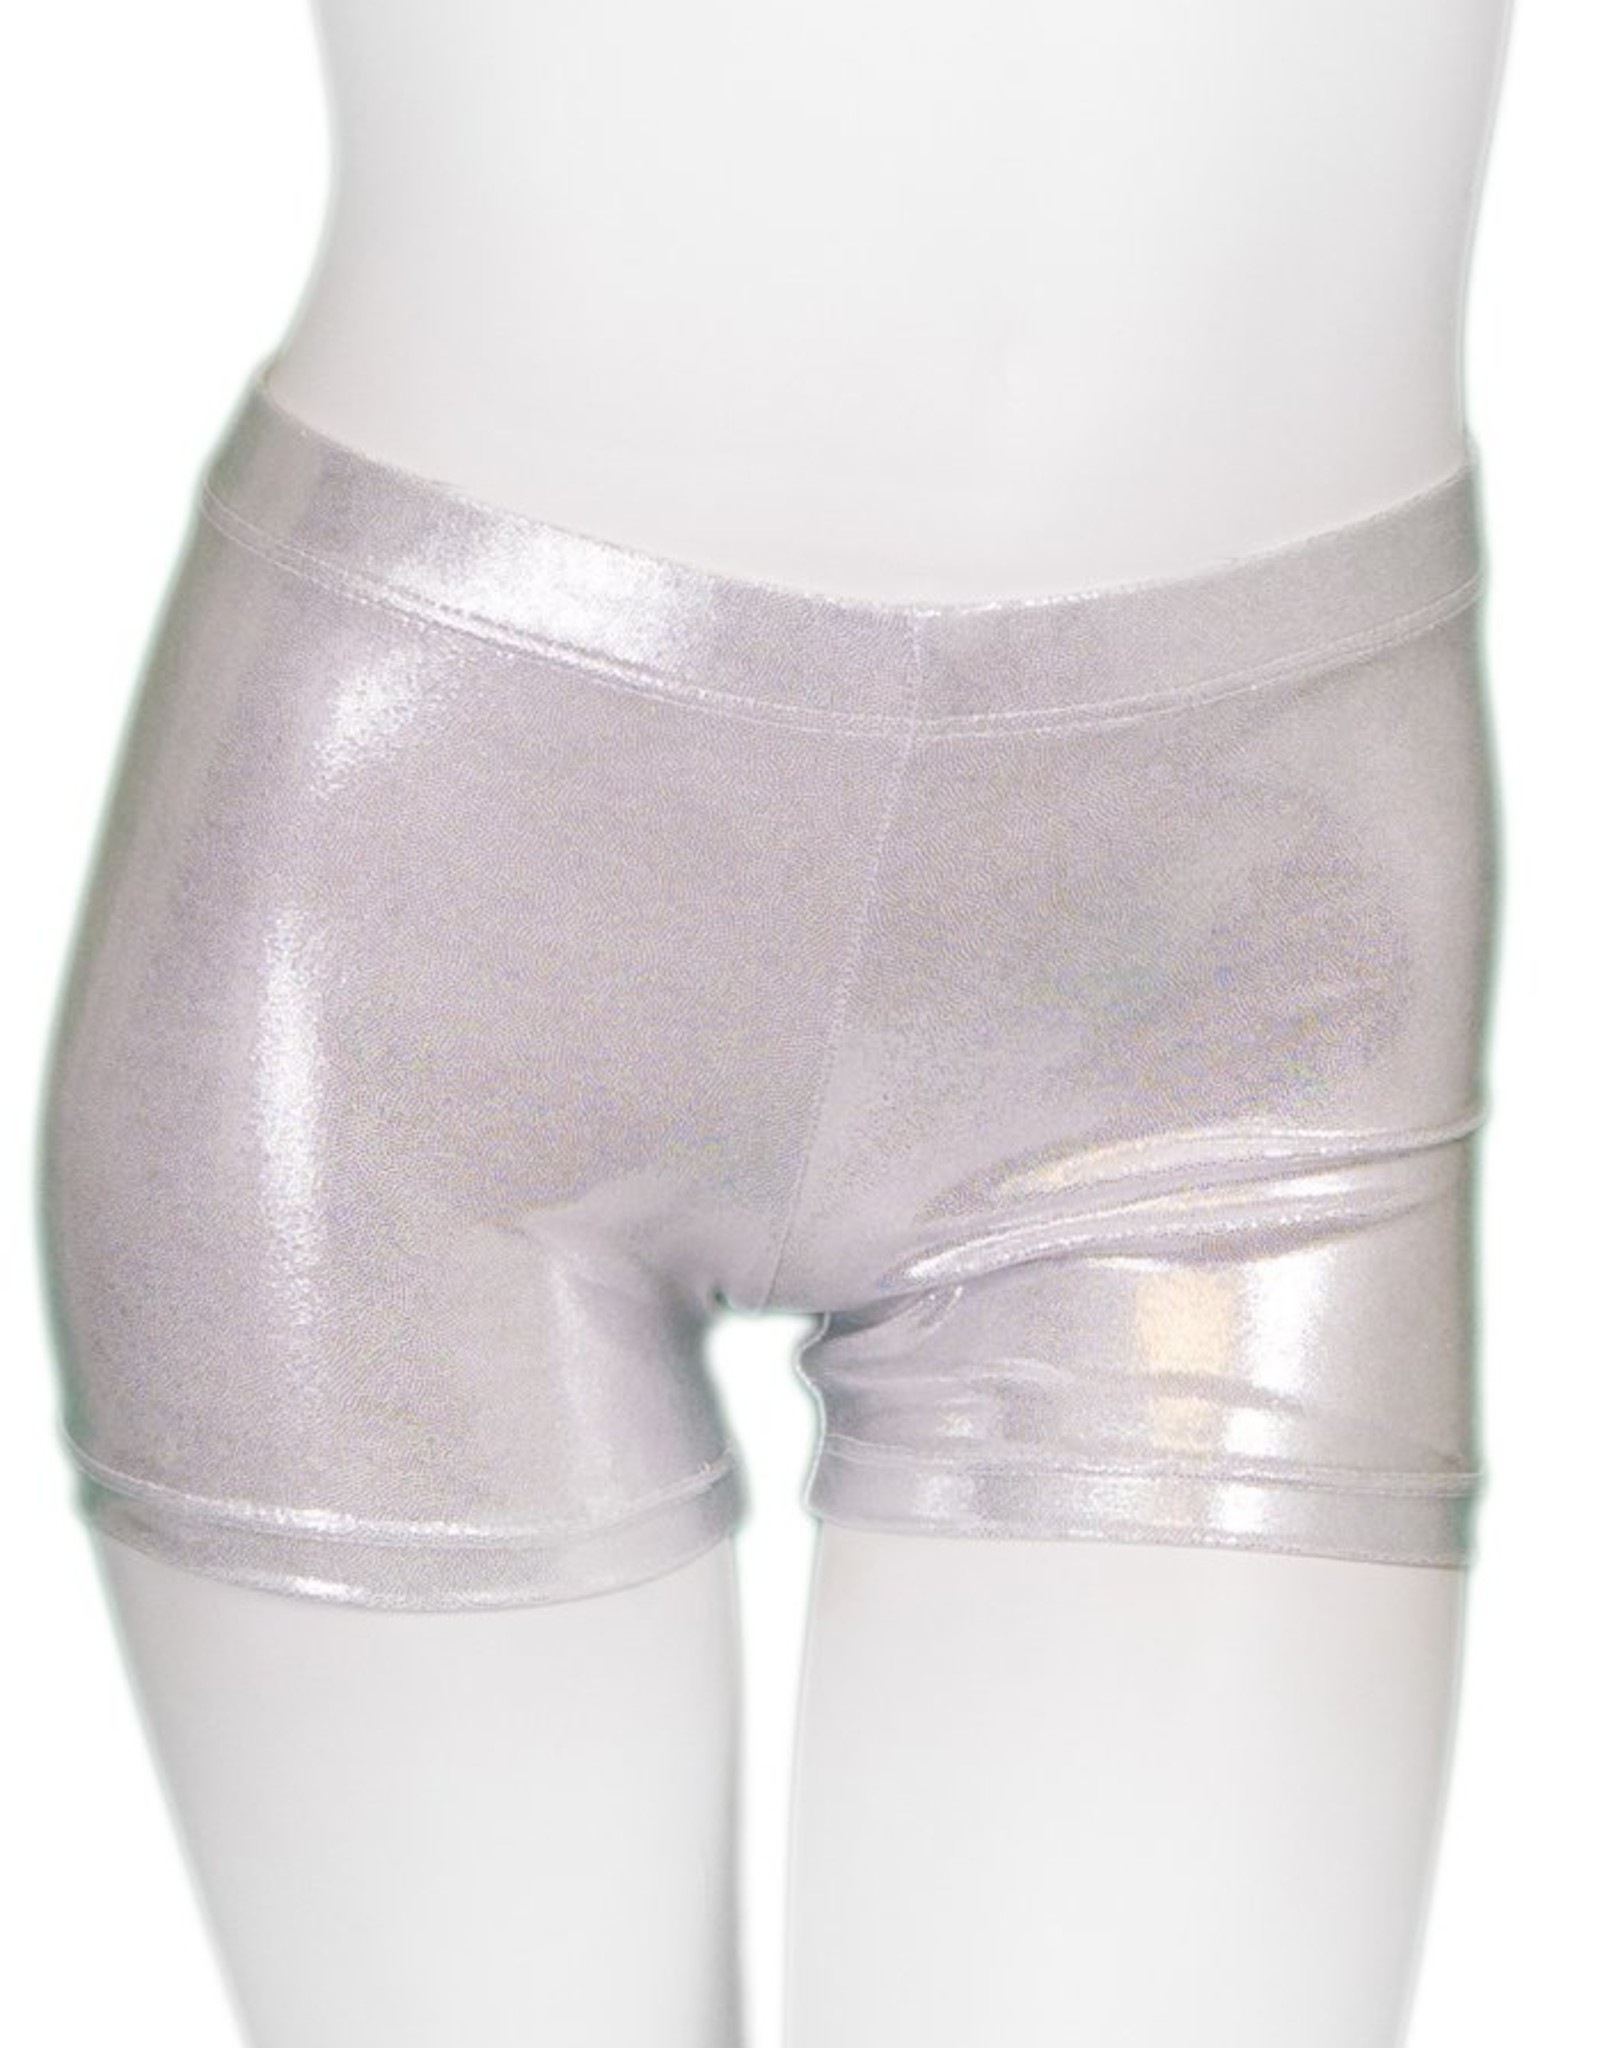 *Mystique Jewel* Shorts In Pink Turquoise or Silver-Grey Purple 